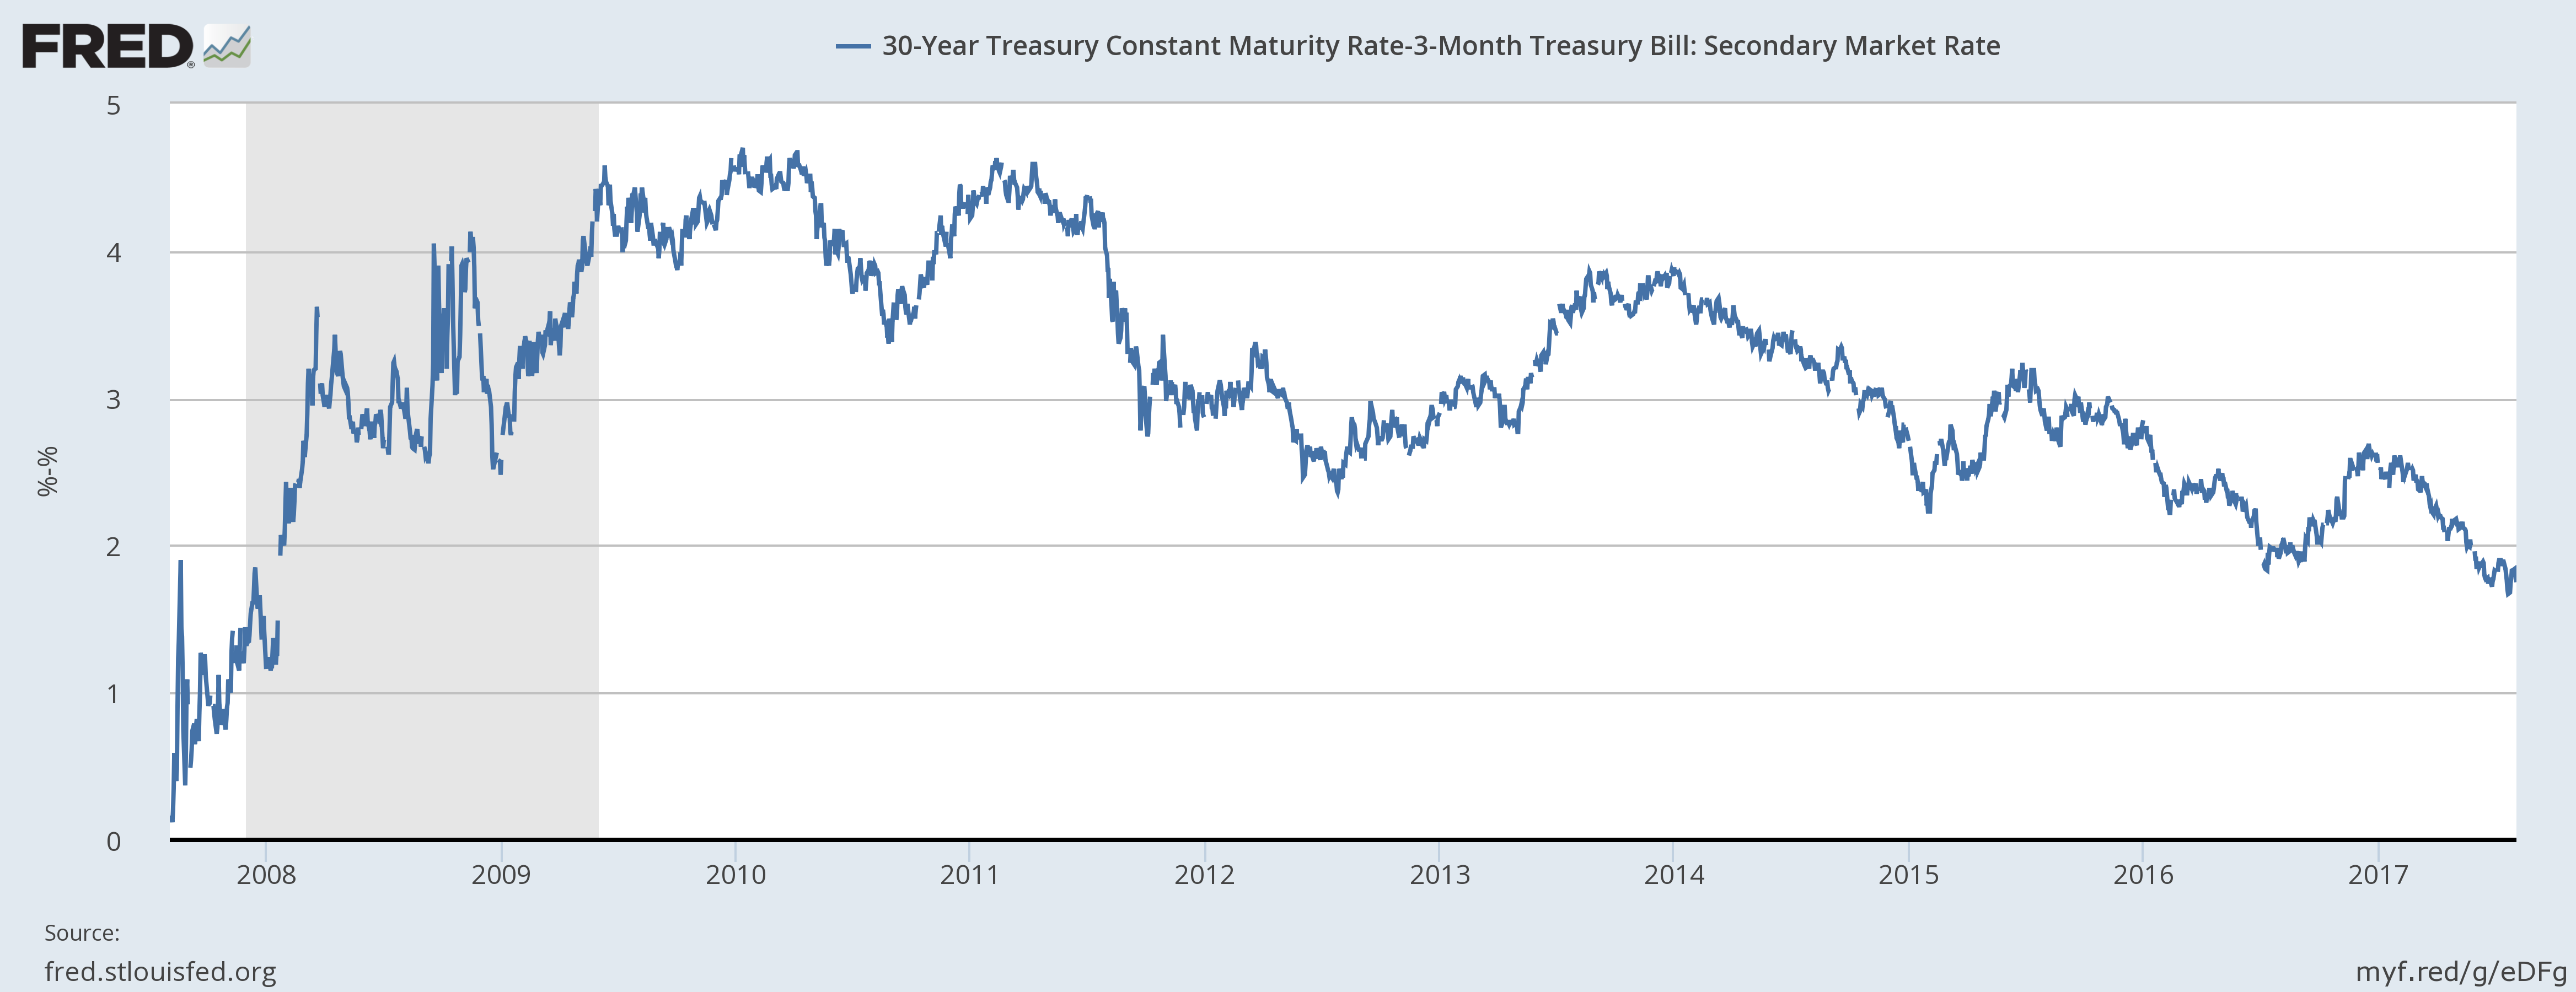 U.S. Bond Market Week In Review: If The Curve Is Any Guide, We're A ...